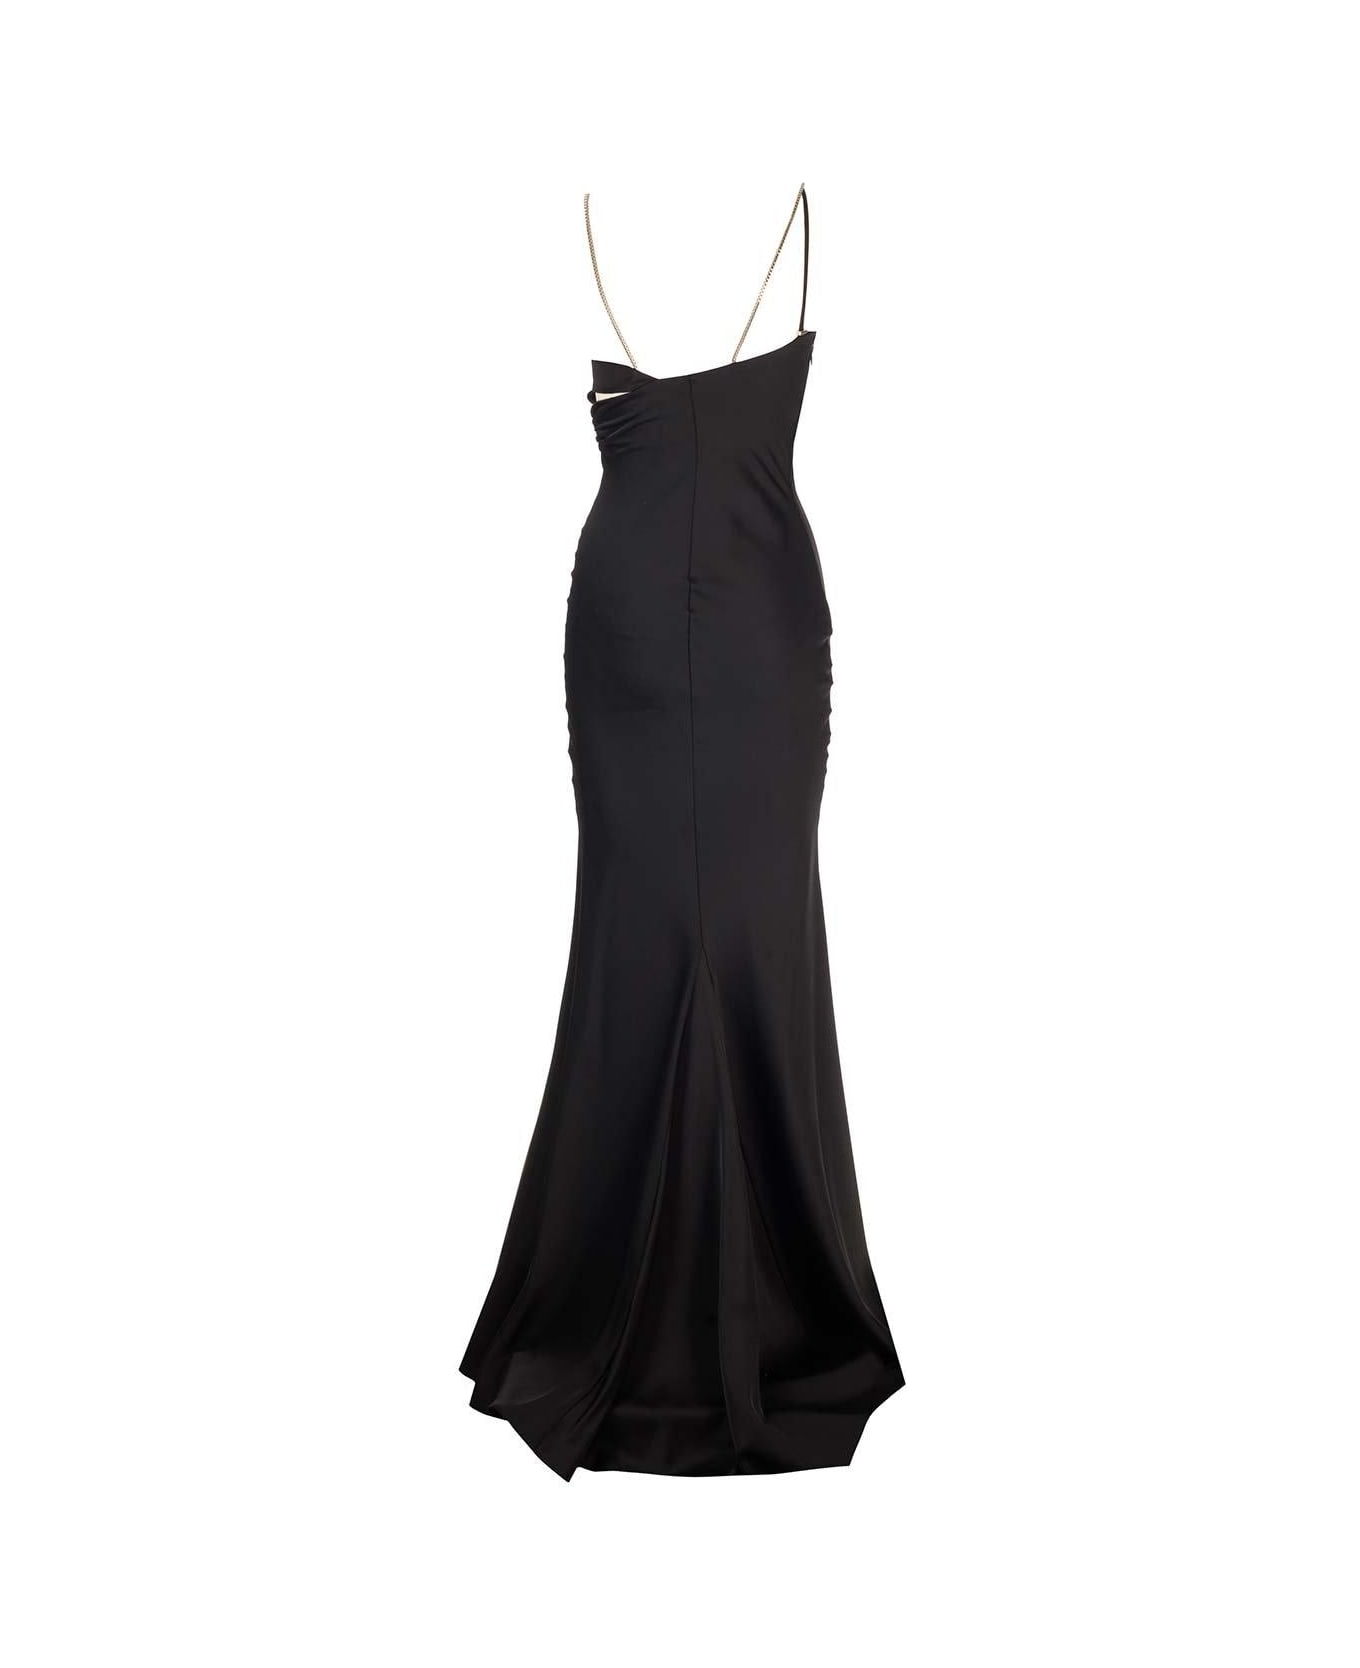 The Attico Cut-out Detailed Flared Sleeveless Dress - BLACK